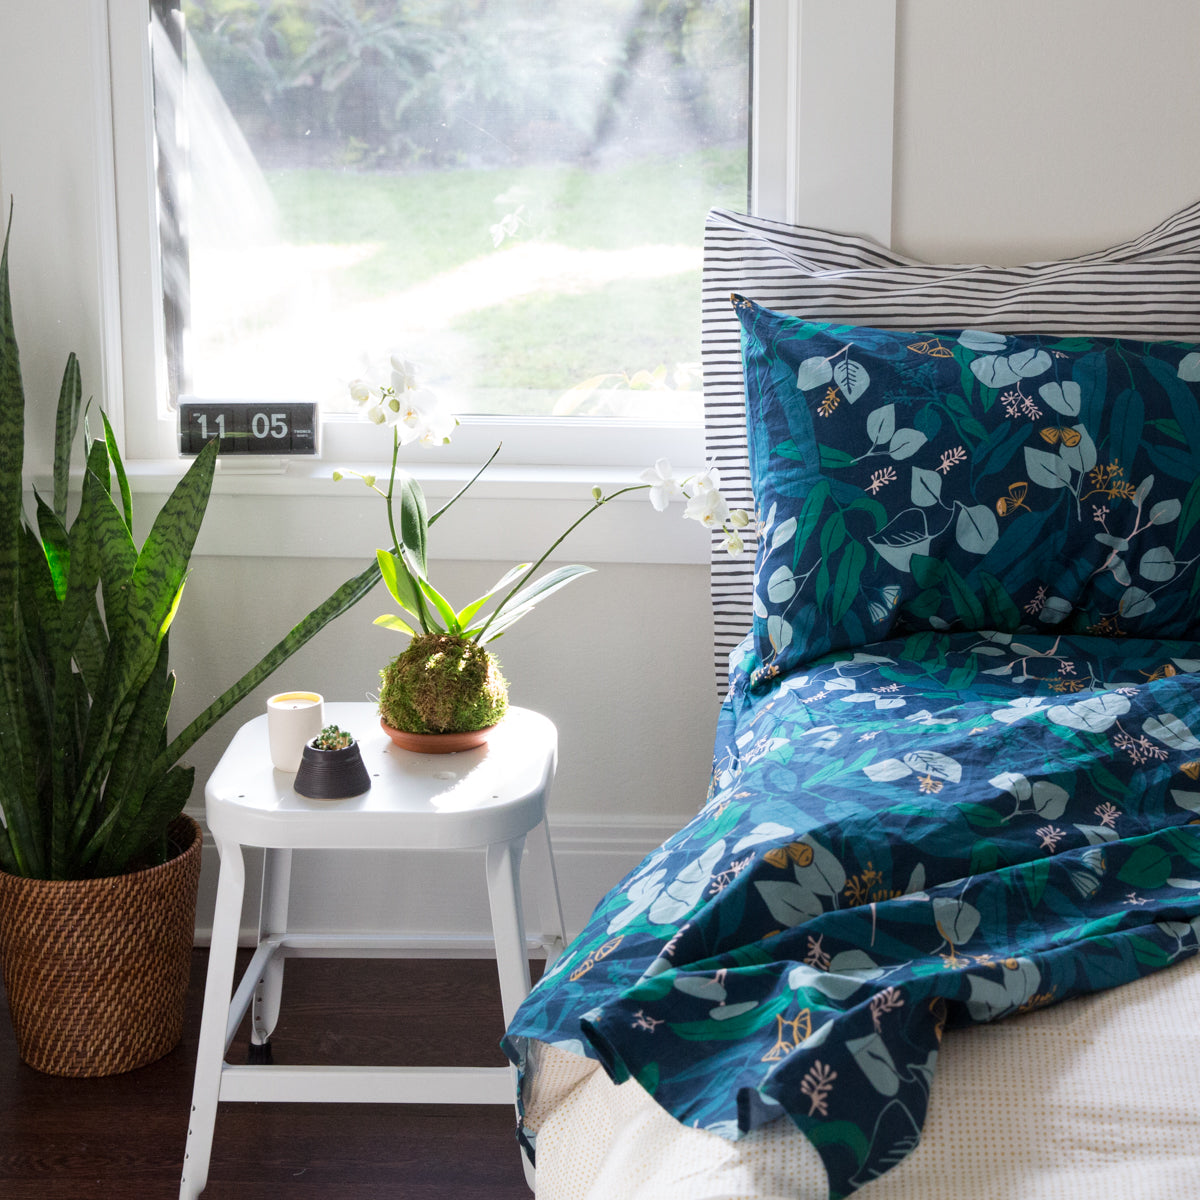 blue and white pillow on a white bed next to a plant on a stool and a window